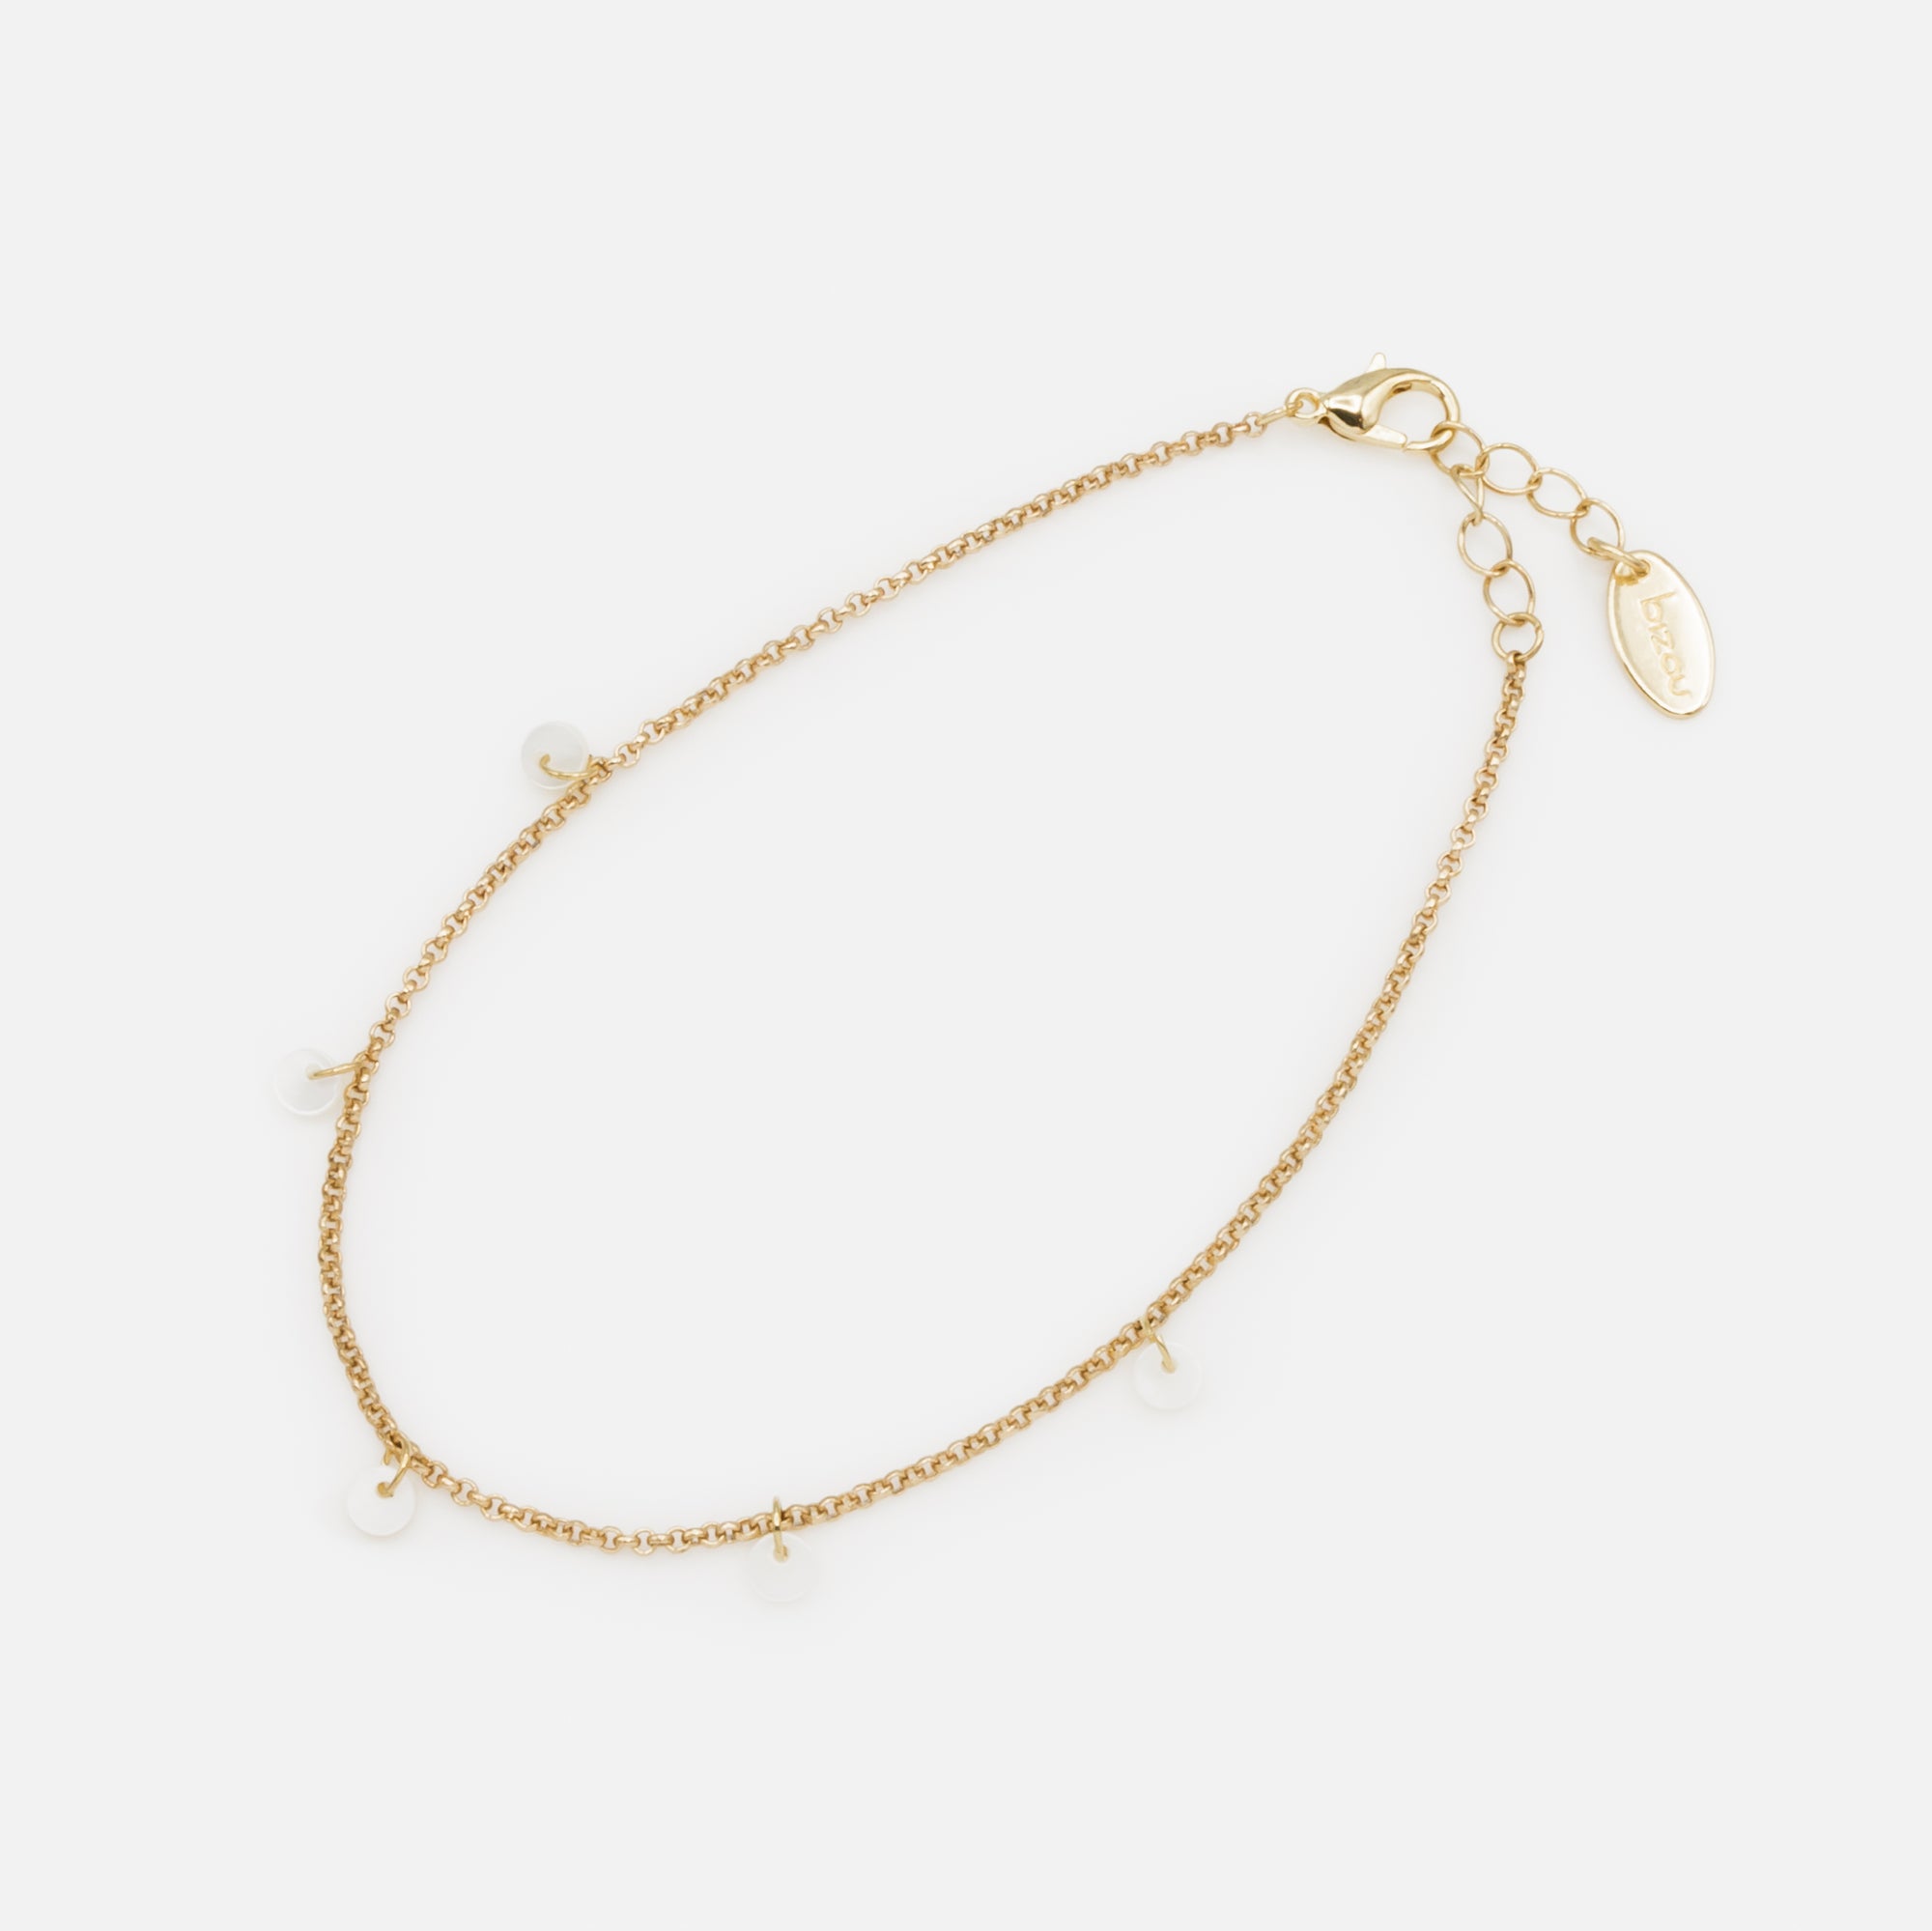 Gold anklet with small pearly discs